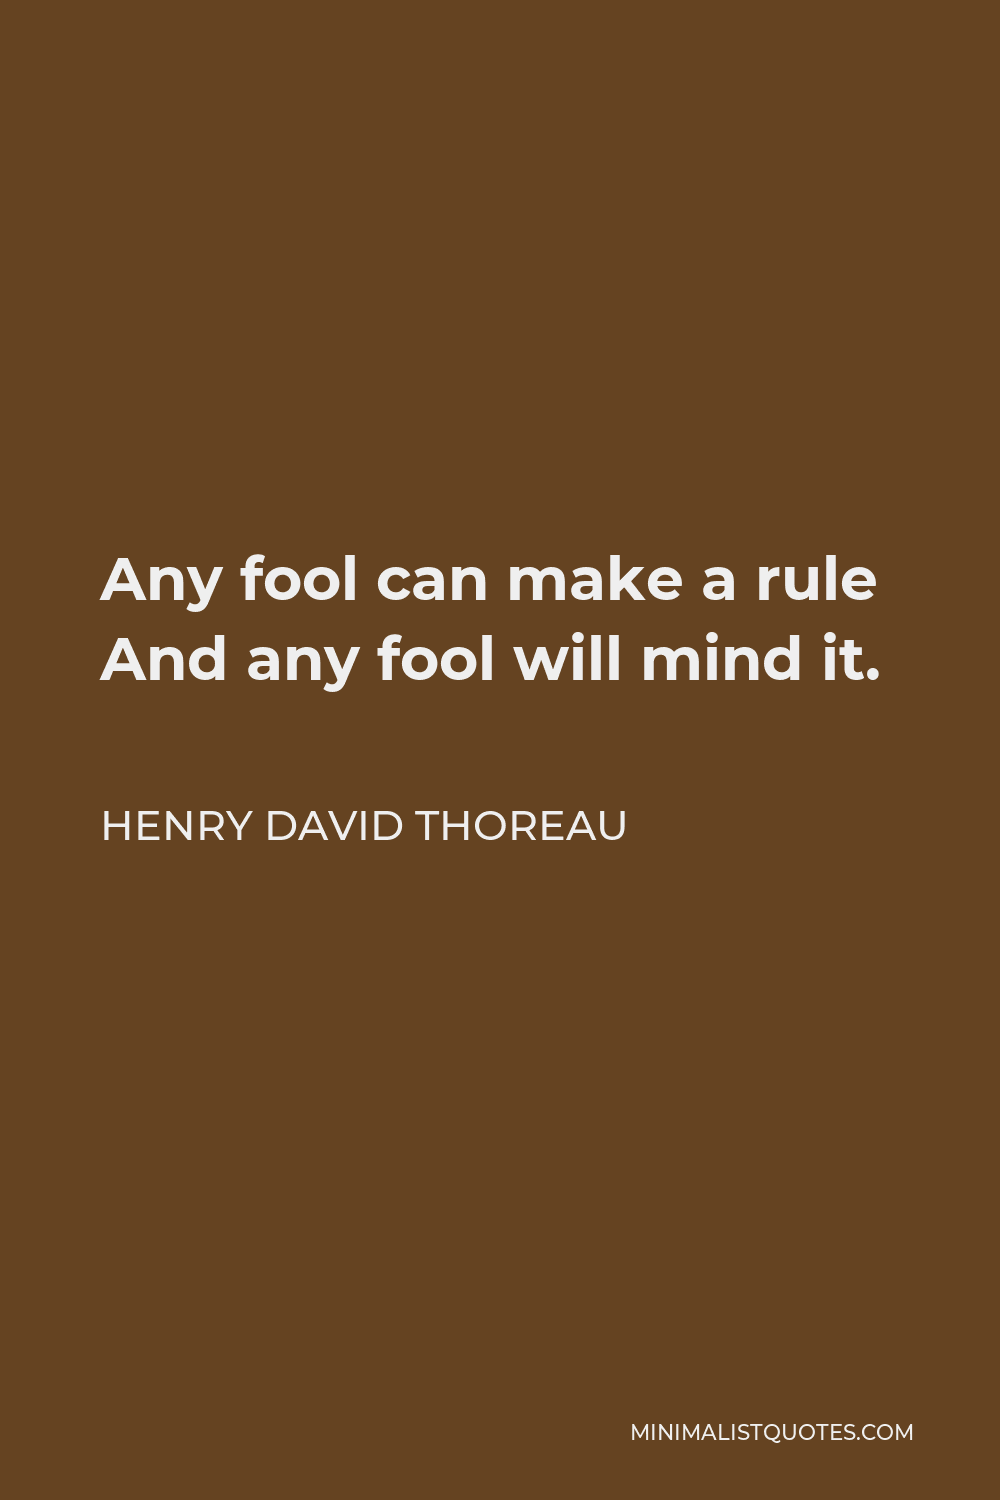 Henry David Thoreau Quote - Any fool can make a rule And any fool will mind it.